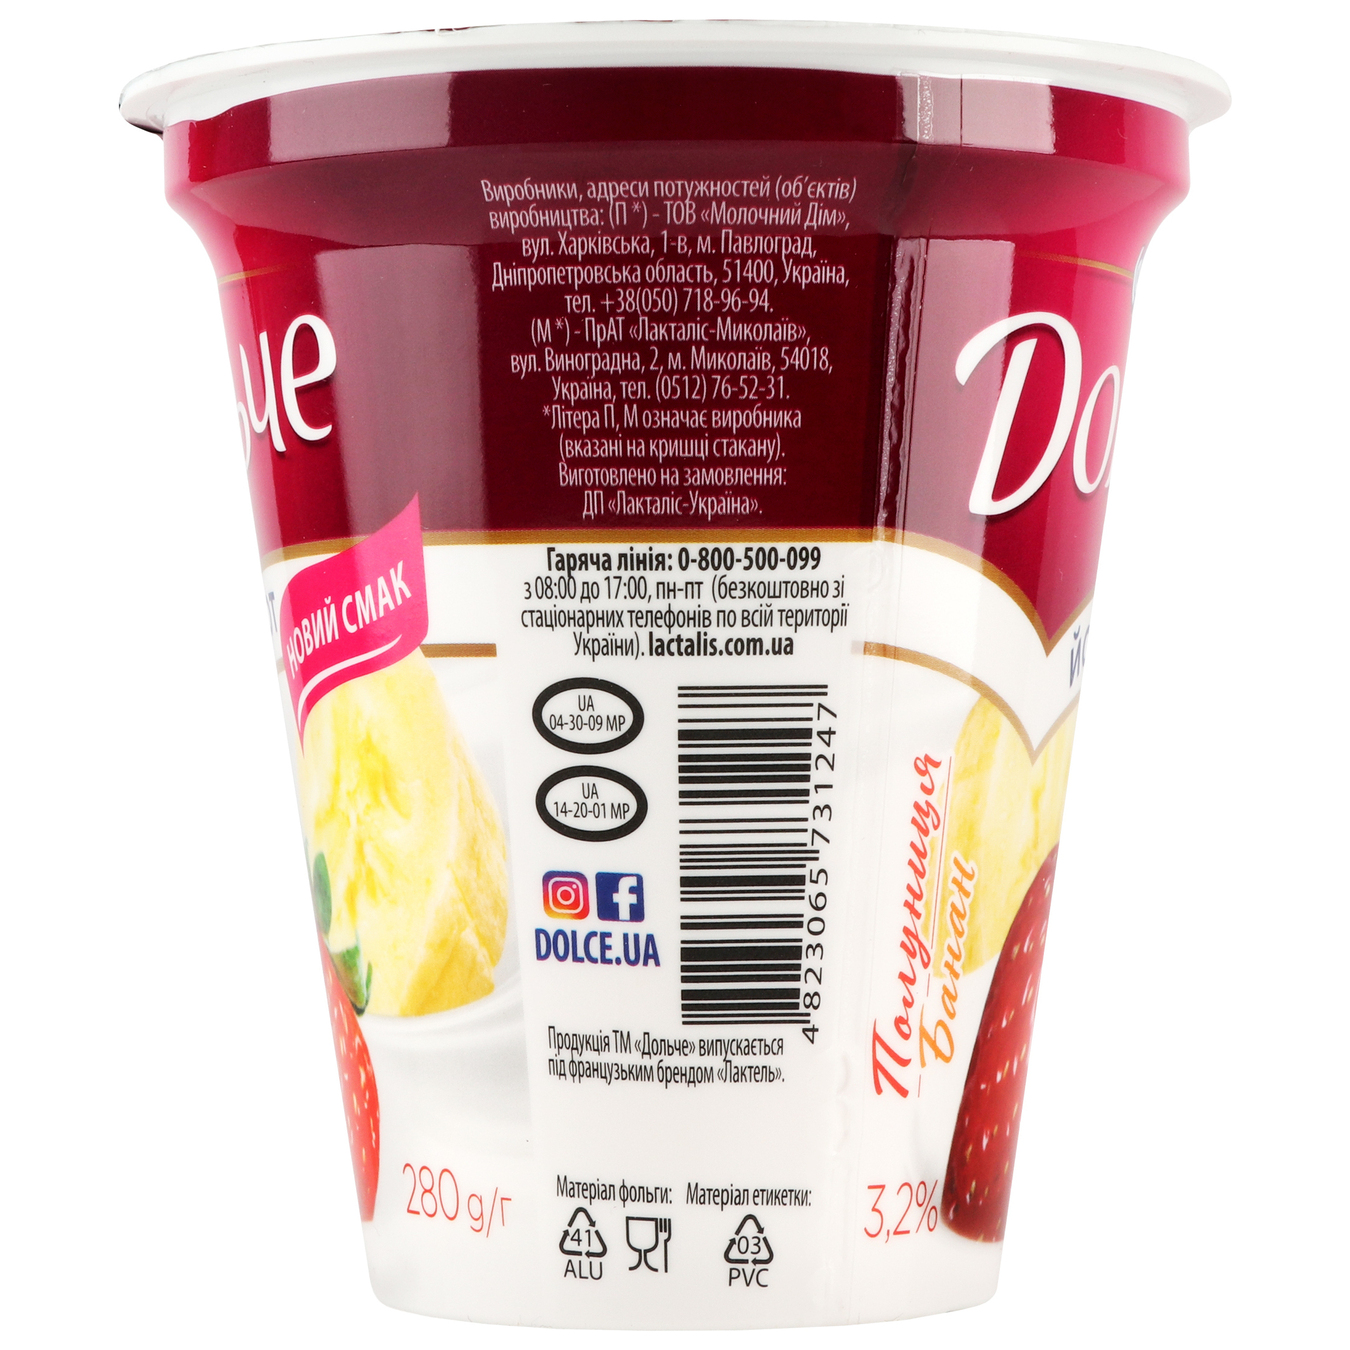 Dolce yogurt with filling Strawberry-banana cup 3.2% 280g 4